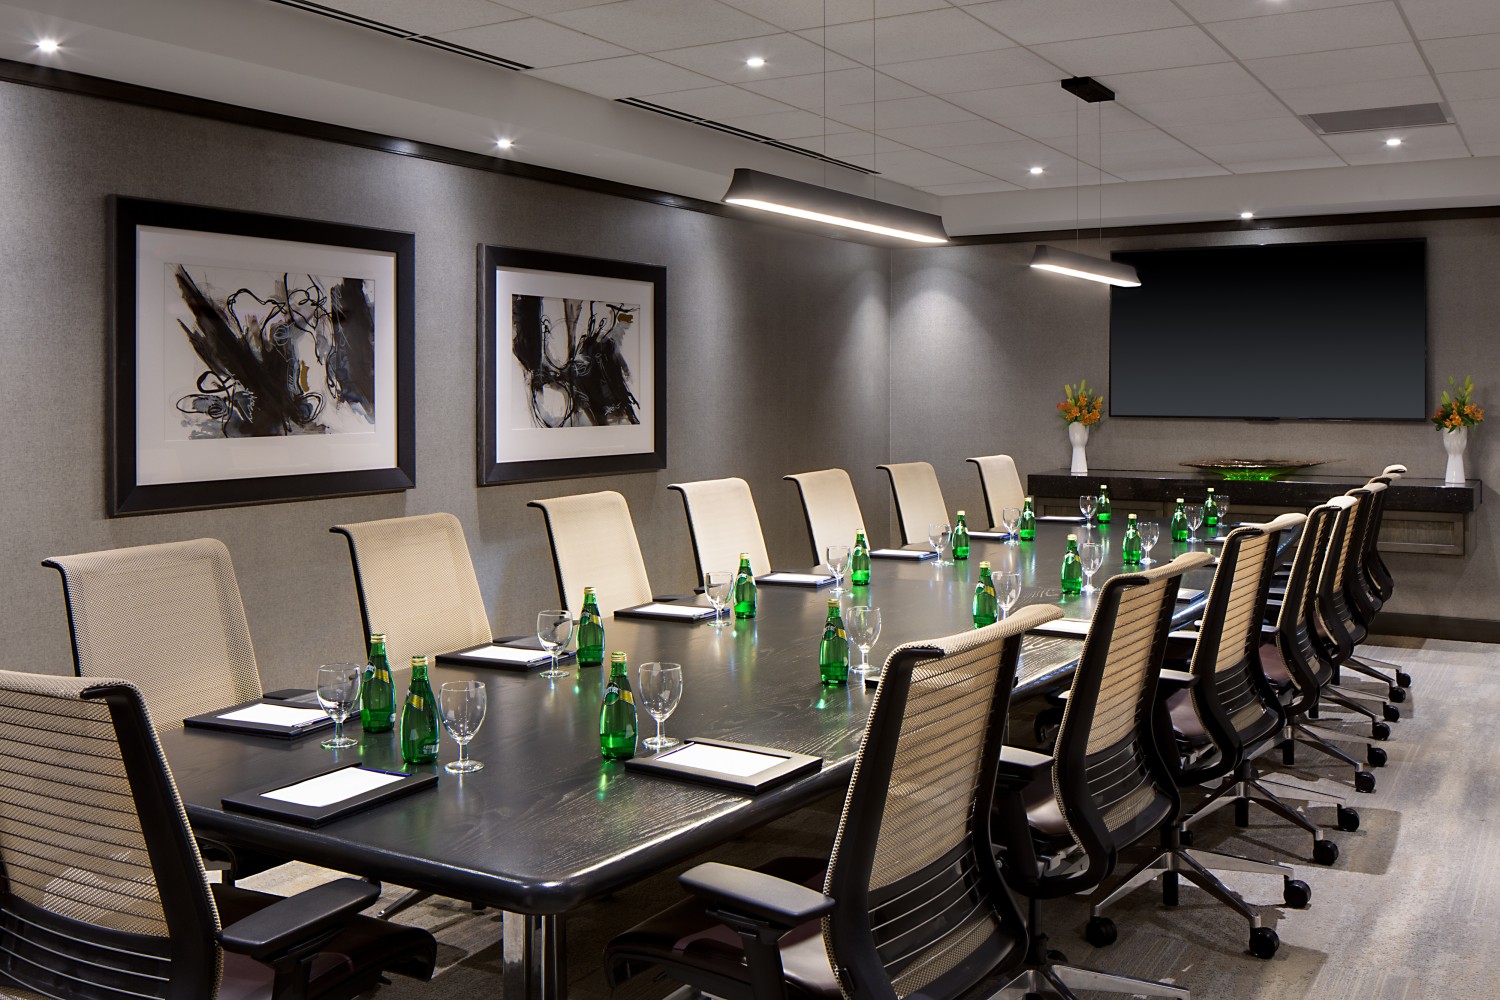 Amway Grand_Fine Arts Meeting Room_Meeting Room_Set Up_Long Table_Chairs_Notepads_Pens_Water Bottles_Paintings_TV_Flowers